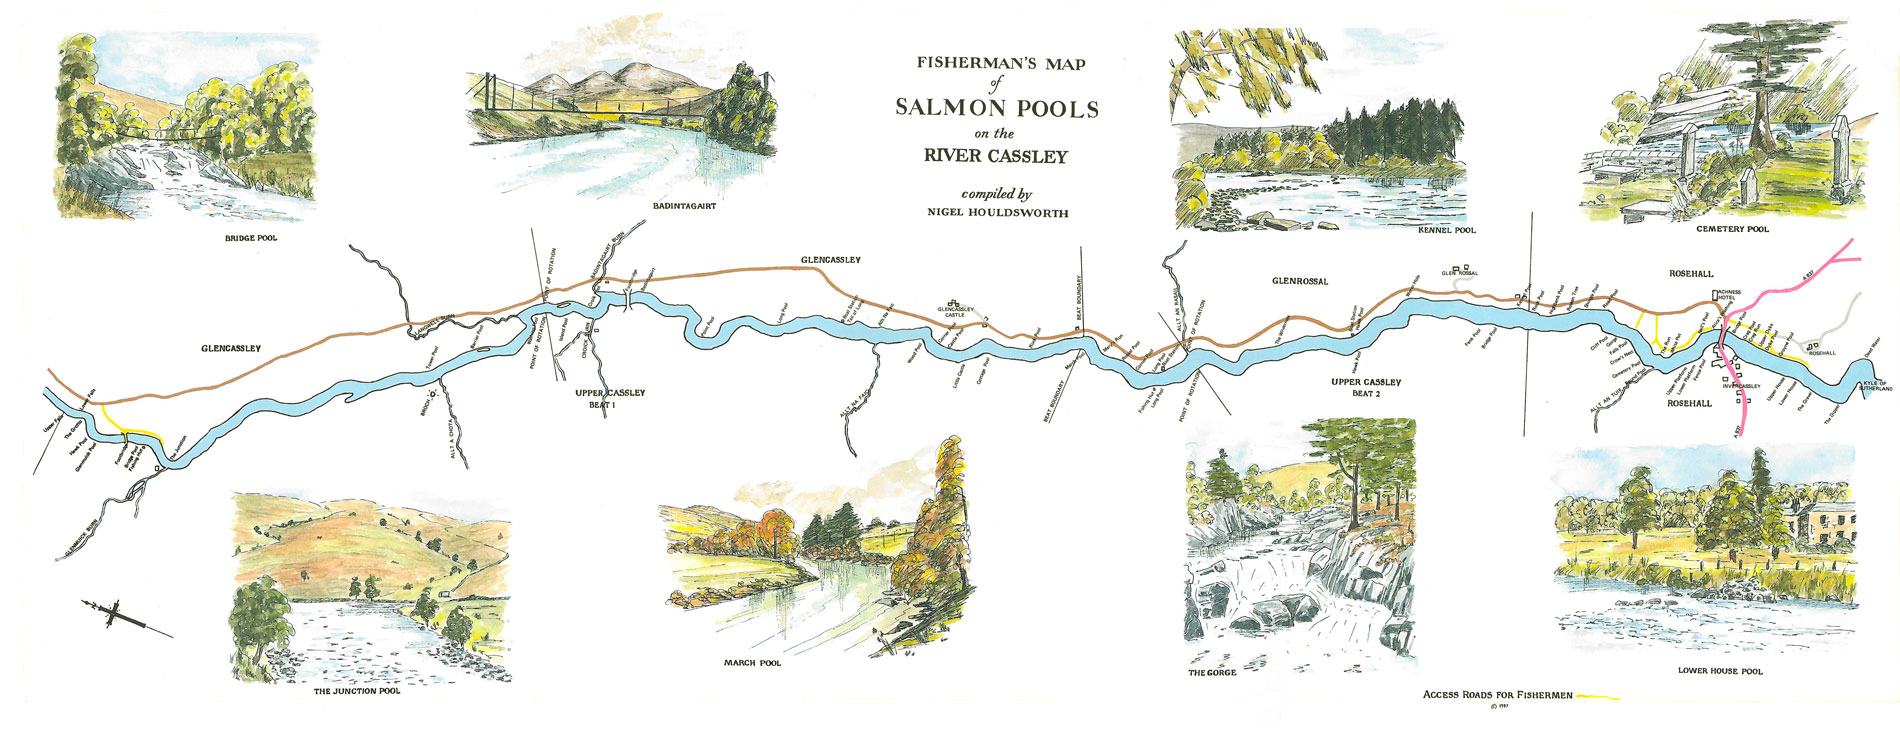 Map of River Cassley